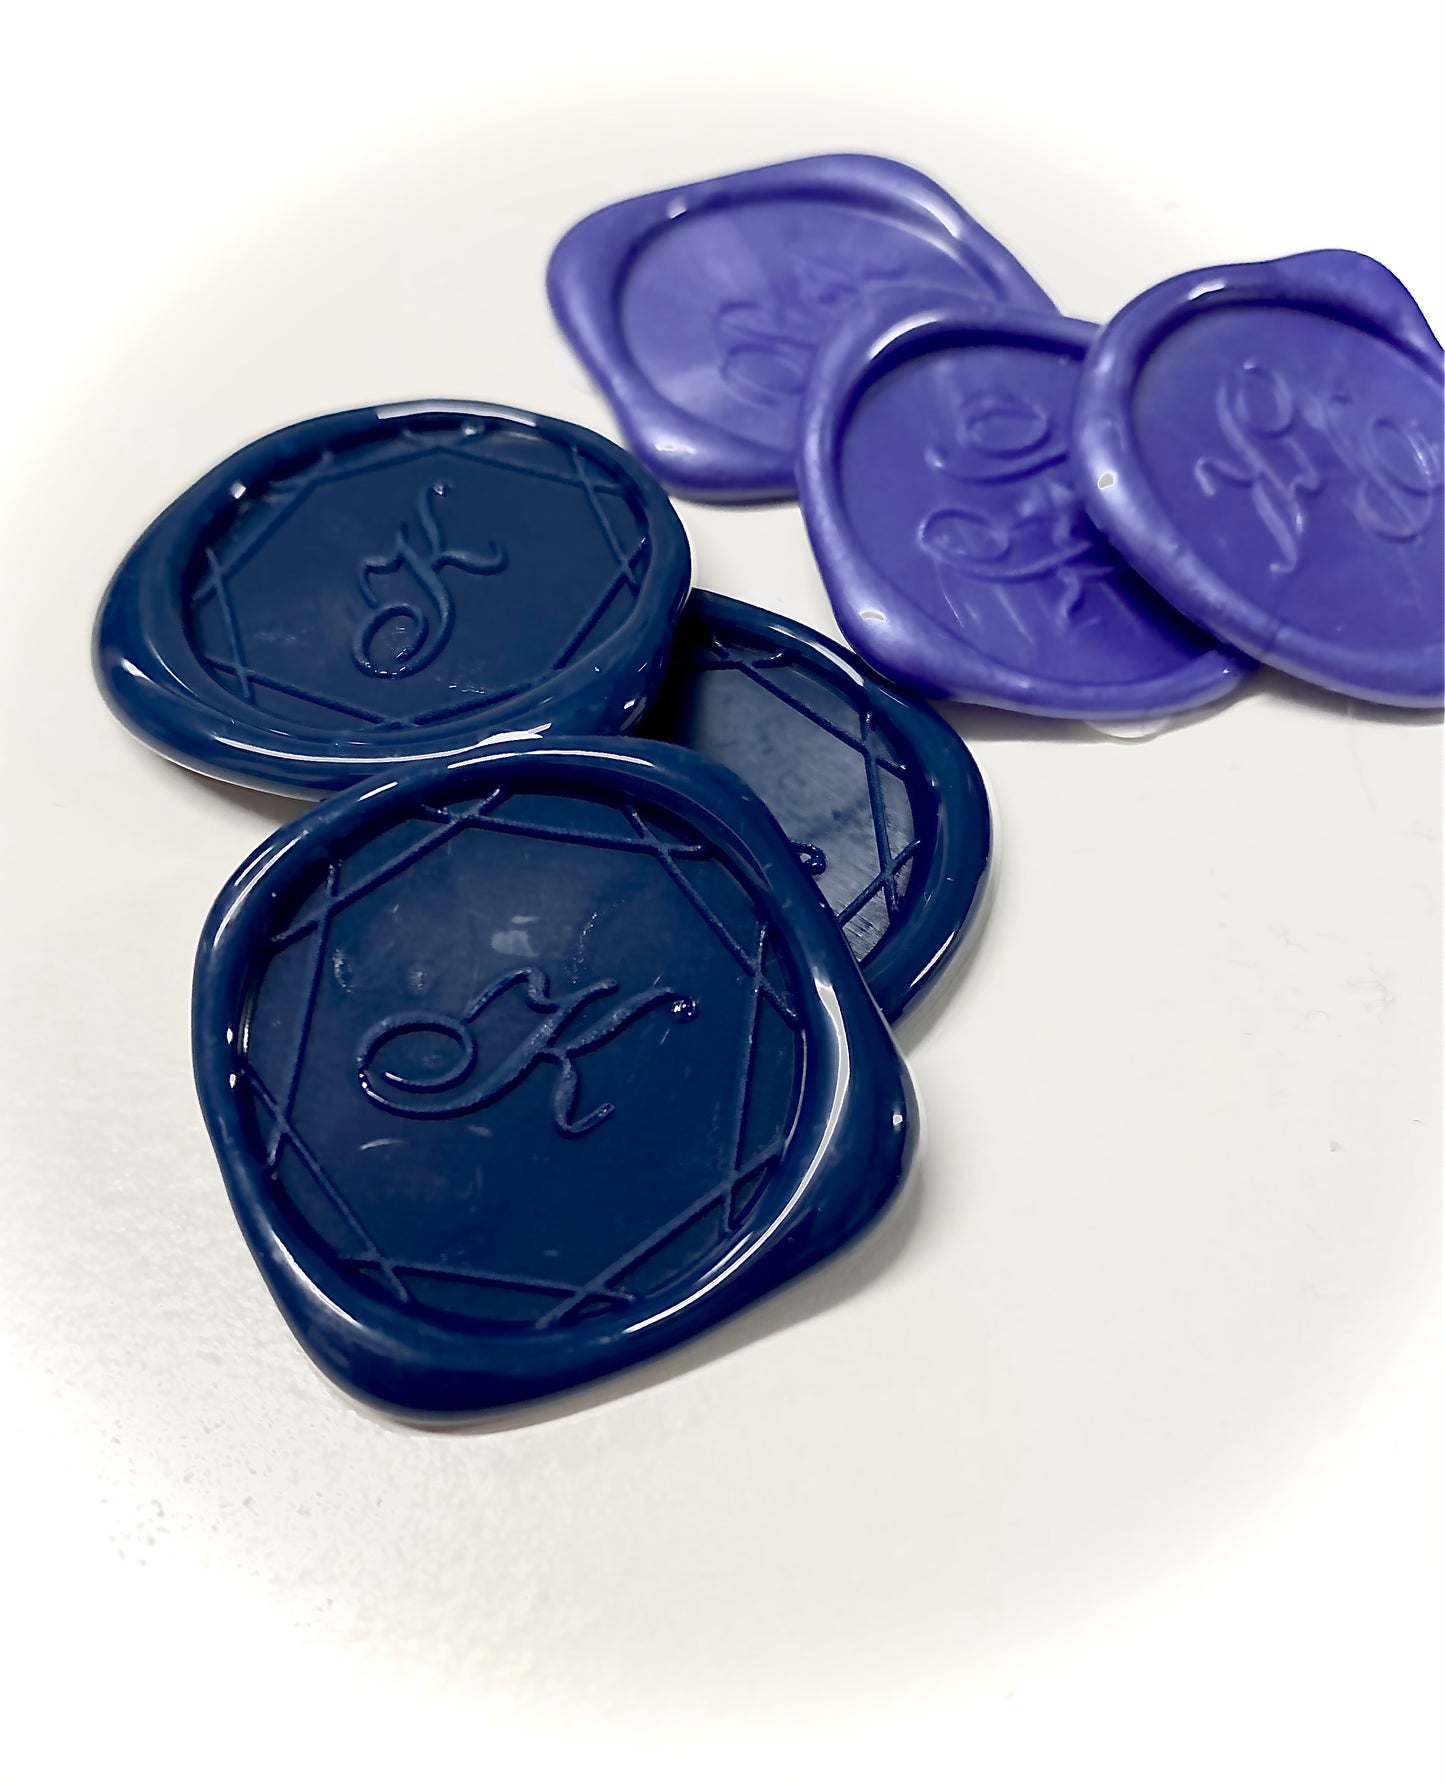 Adhesive Wax Seals, Personalized Design